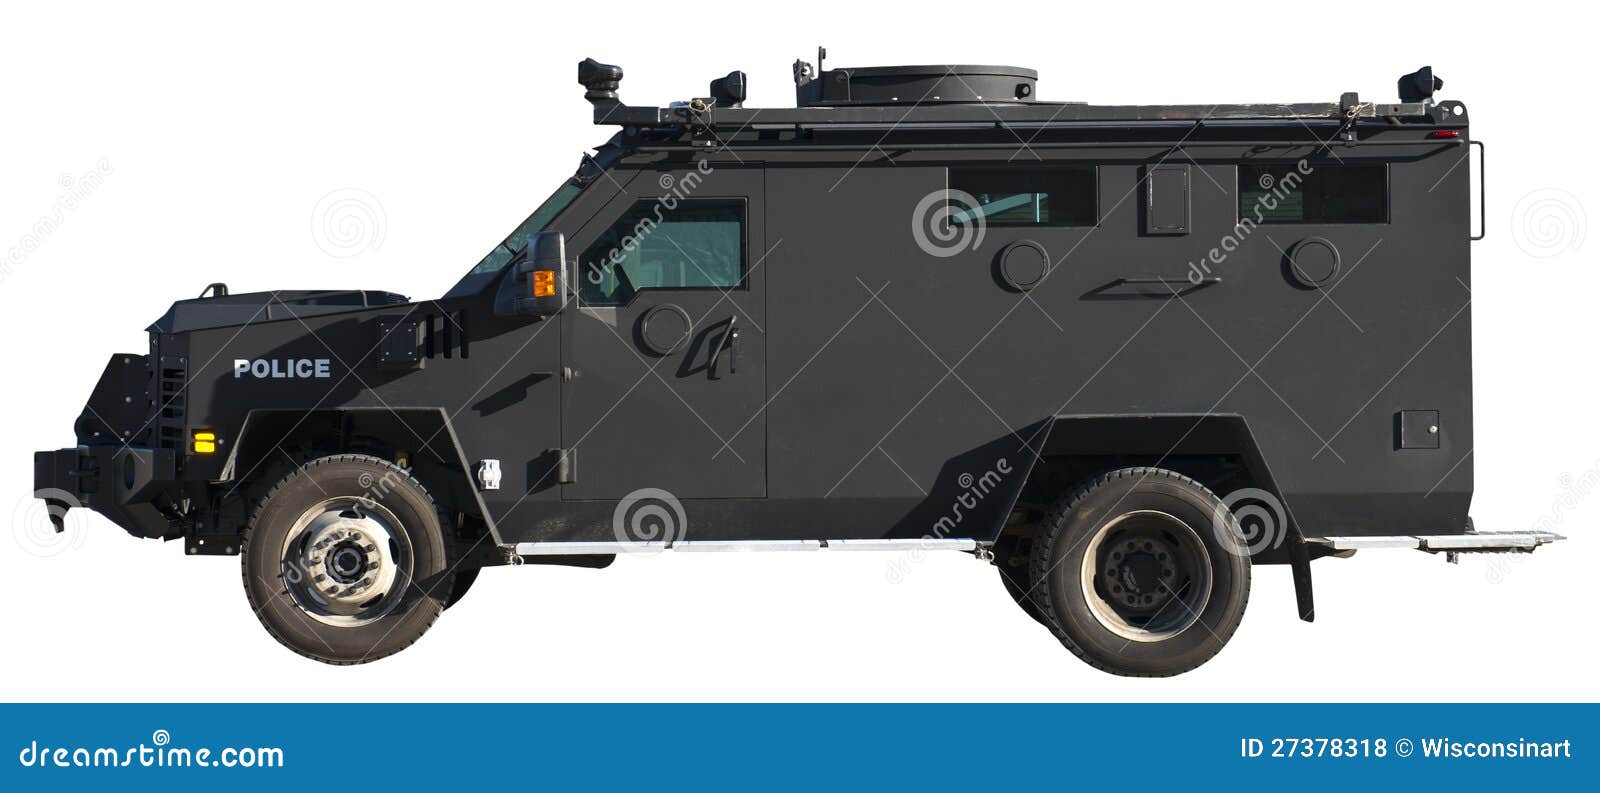 swat team armored truck vehicle 